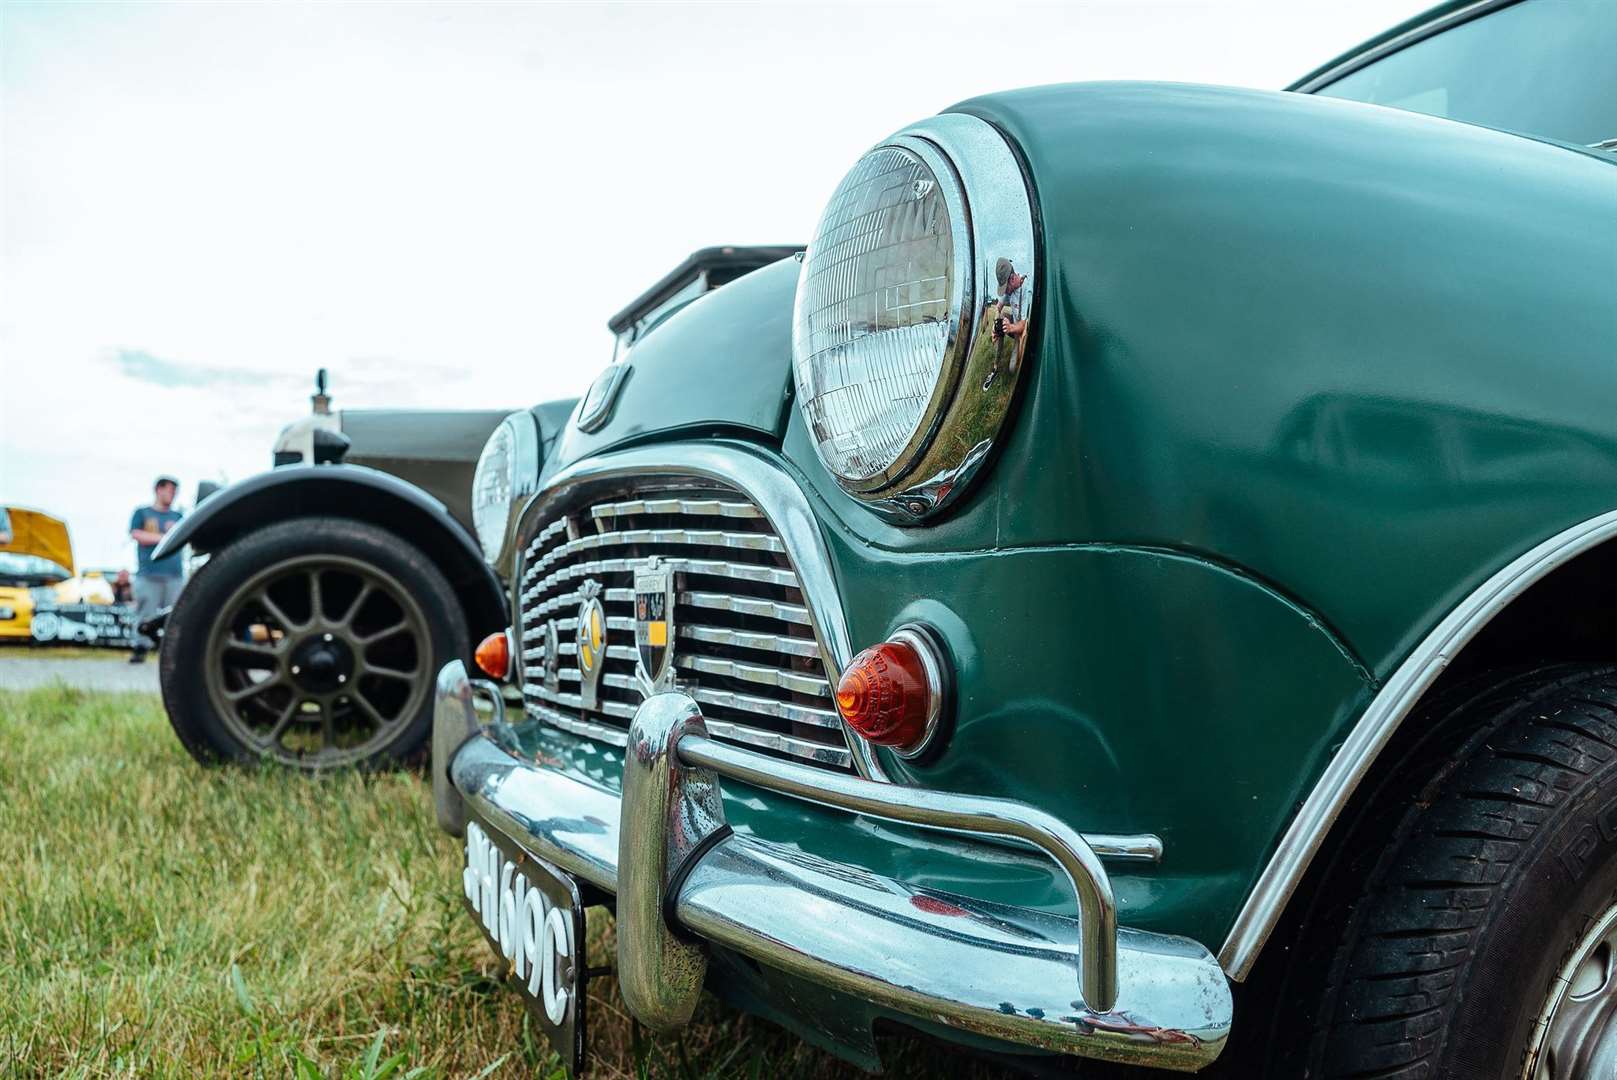 Visitors can expect live music, vintage vehicles and street food vendors for a fun-filled day out. Picture: Deal Classic Motor Show